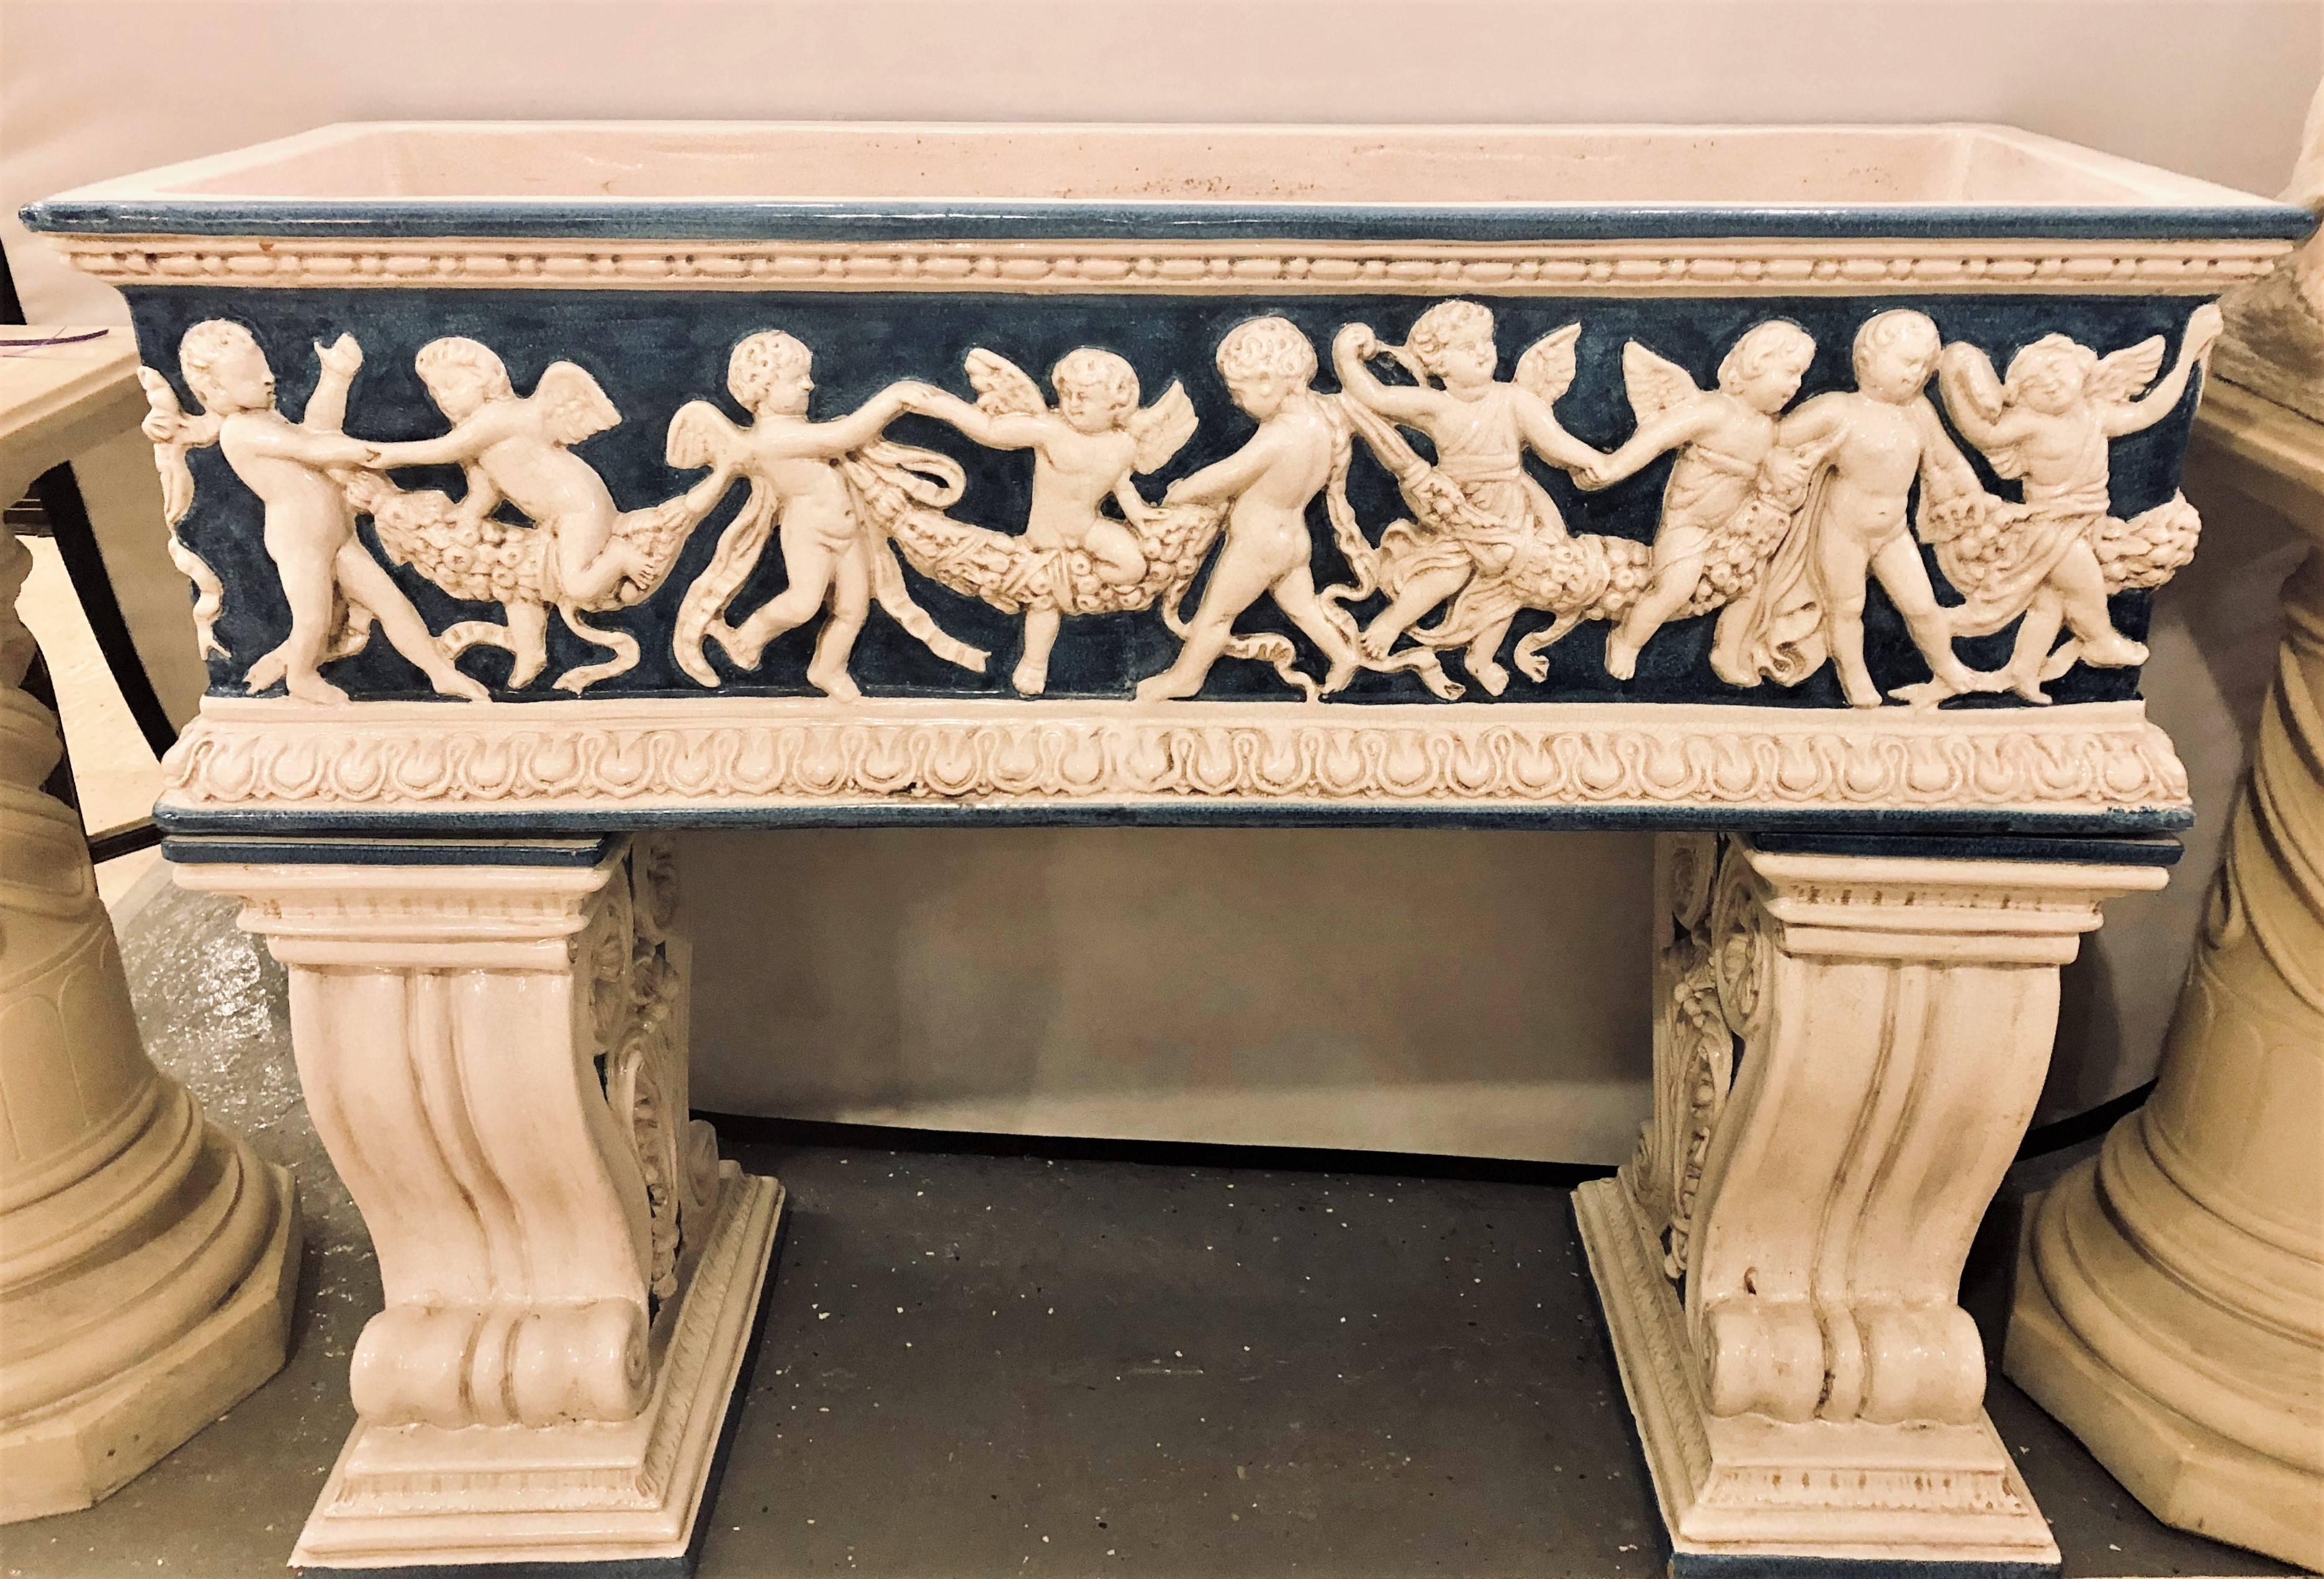 A pair of ceramic planter tops depicting cherubs dancing (one lacking pedestals bases). These freestanding planter tops can be used on their own or stand on any pedestals. Pedestals seen are for one jardinare only. These are simply stunning in a